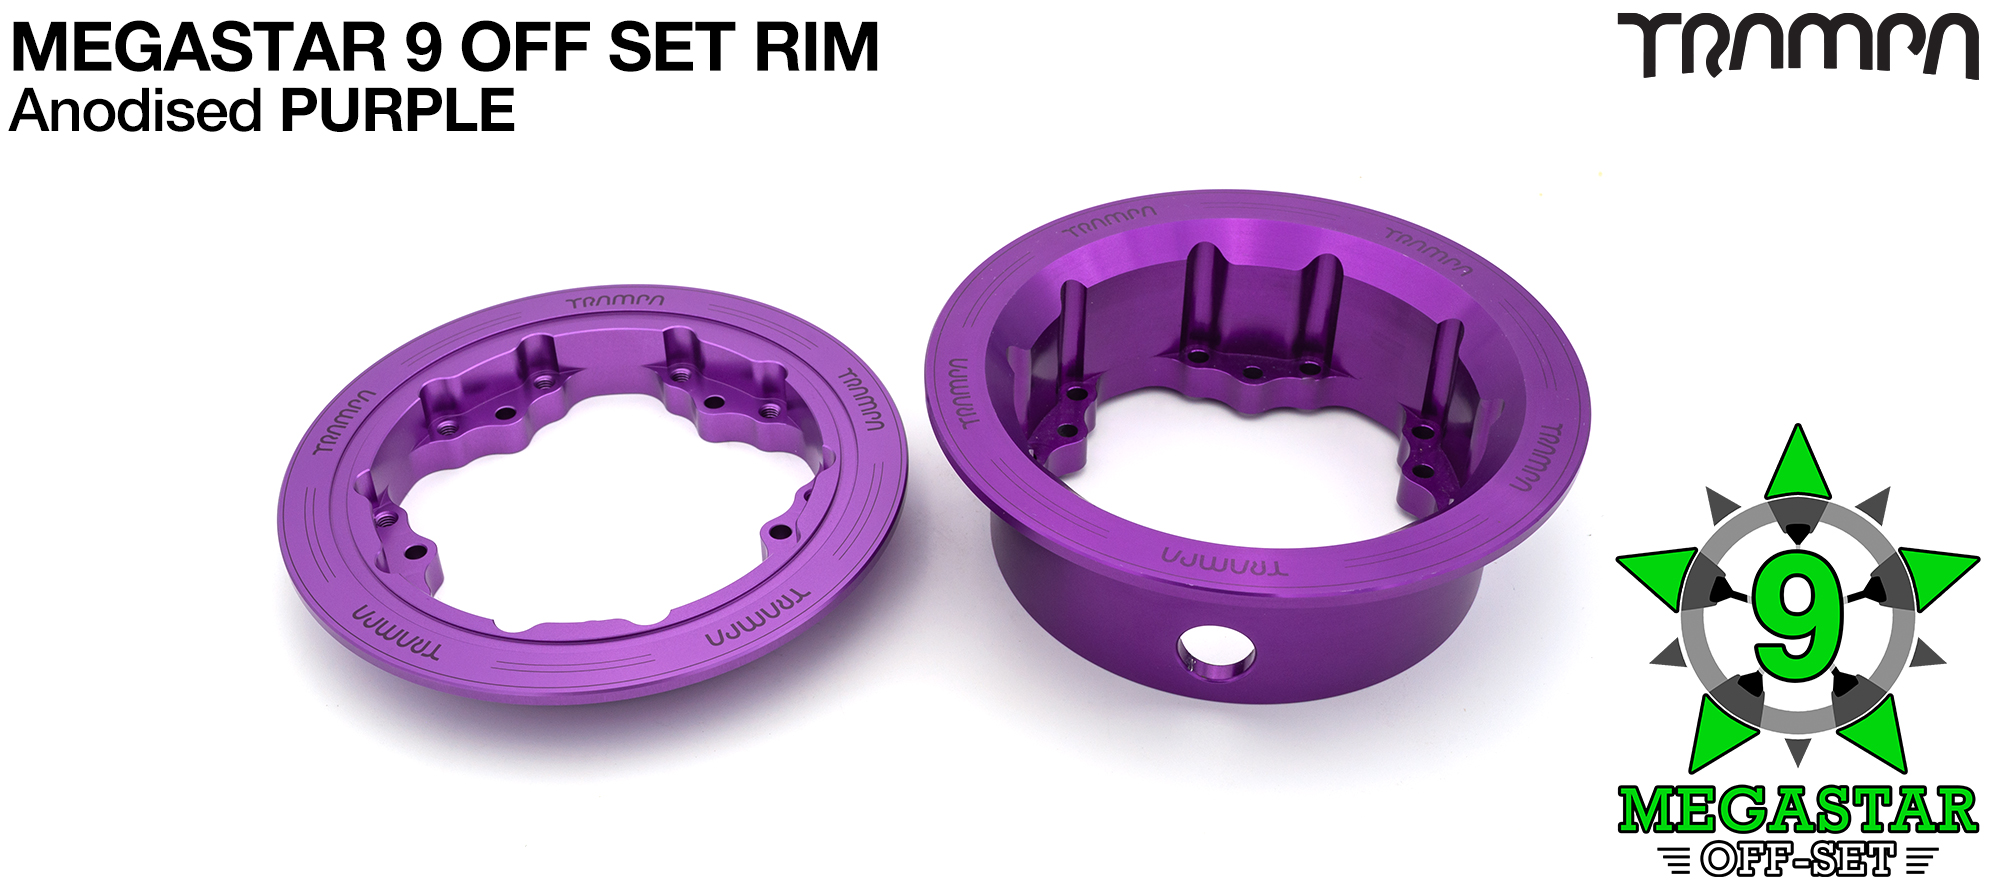 MEGASTAR 9 Rims Measure 3.75/4x 2.5 Inch & the bearings are positioned OFF-SET & accept 3.75 & 4 Inch Rim Tyres - PURPLE